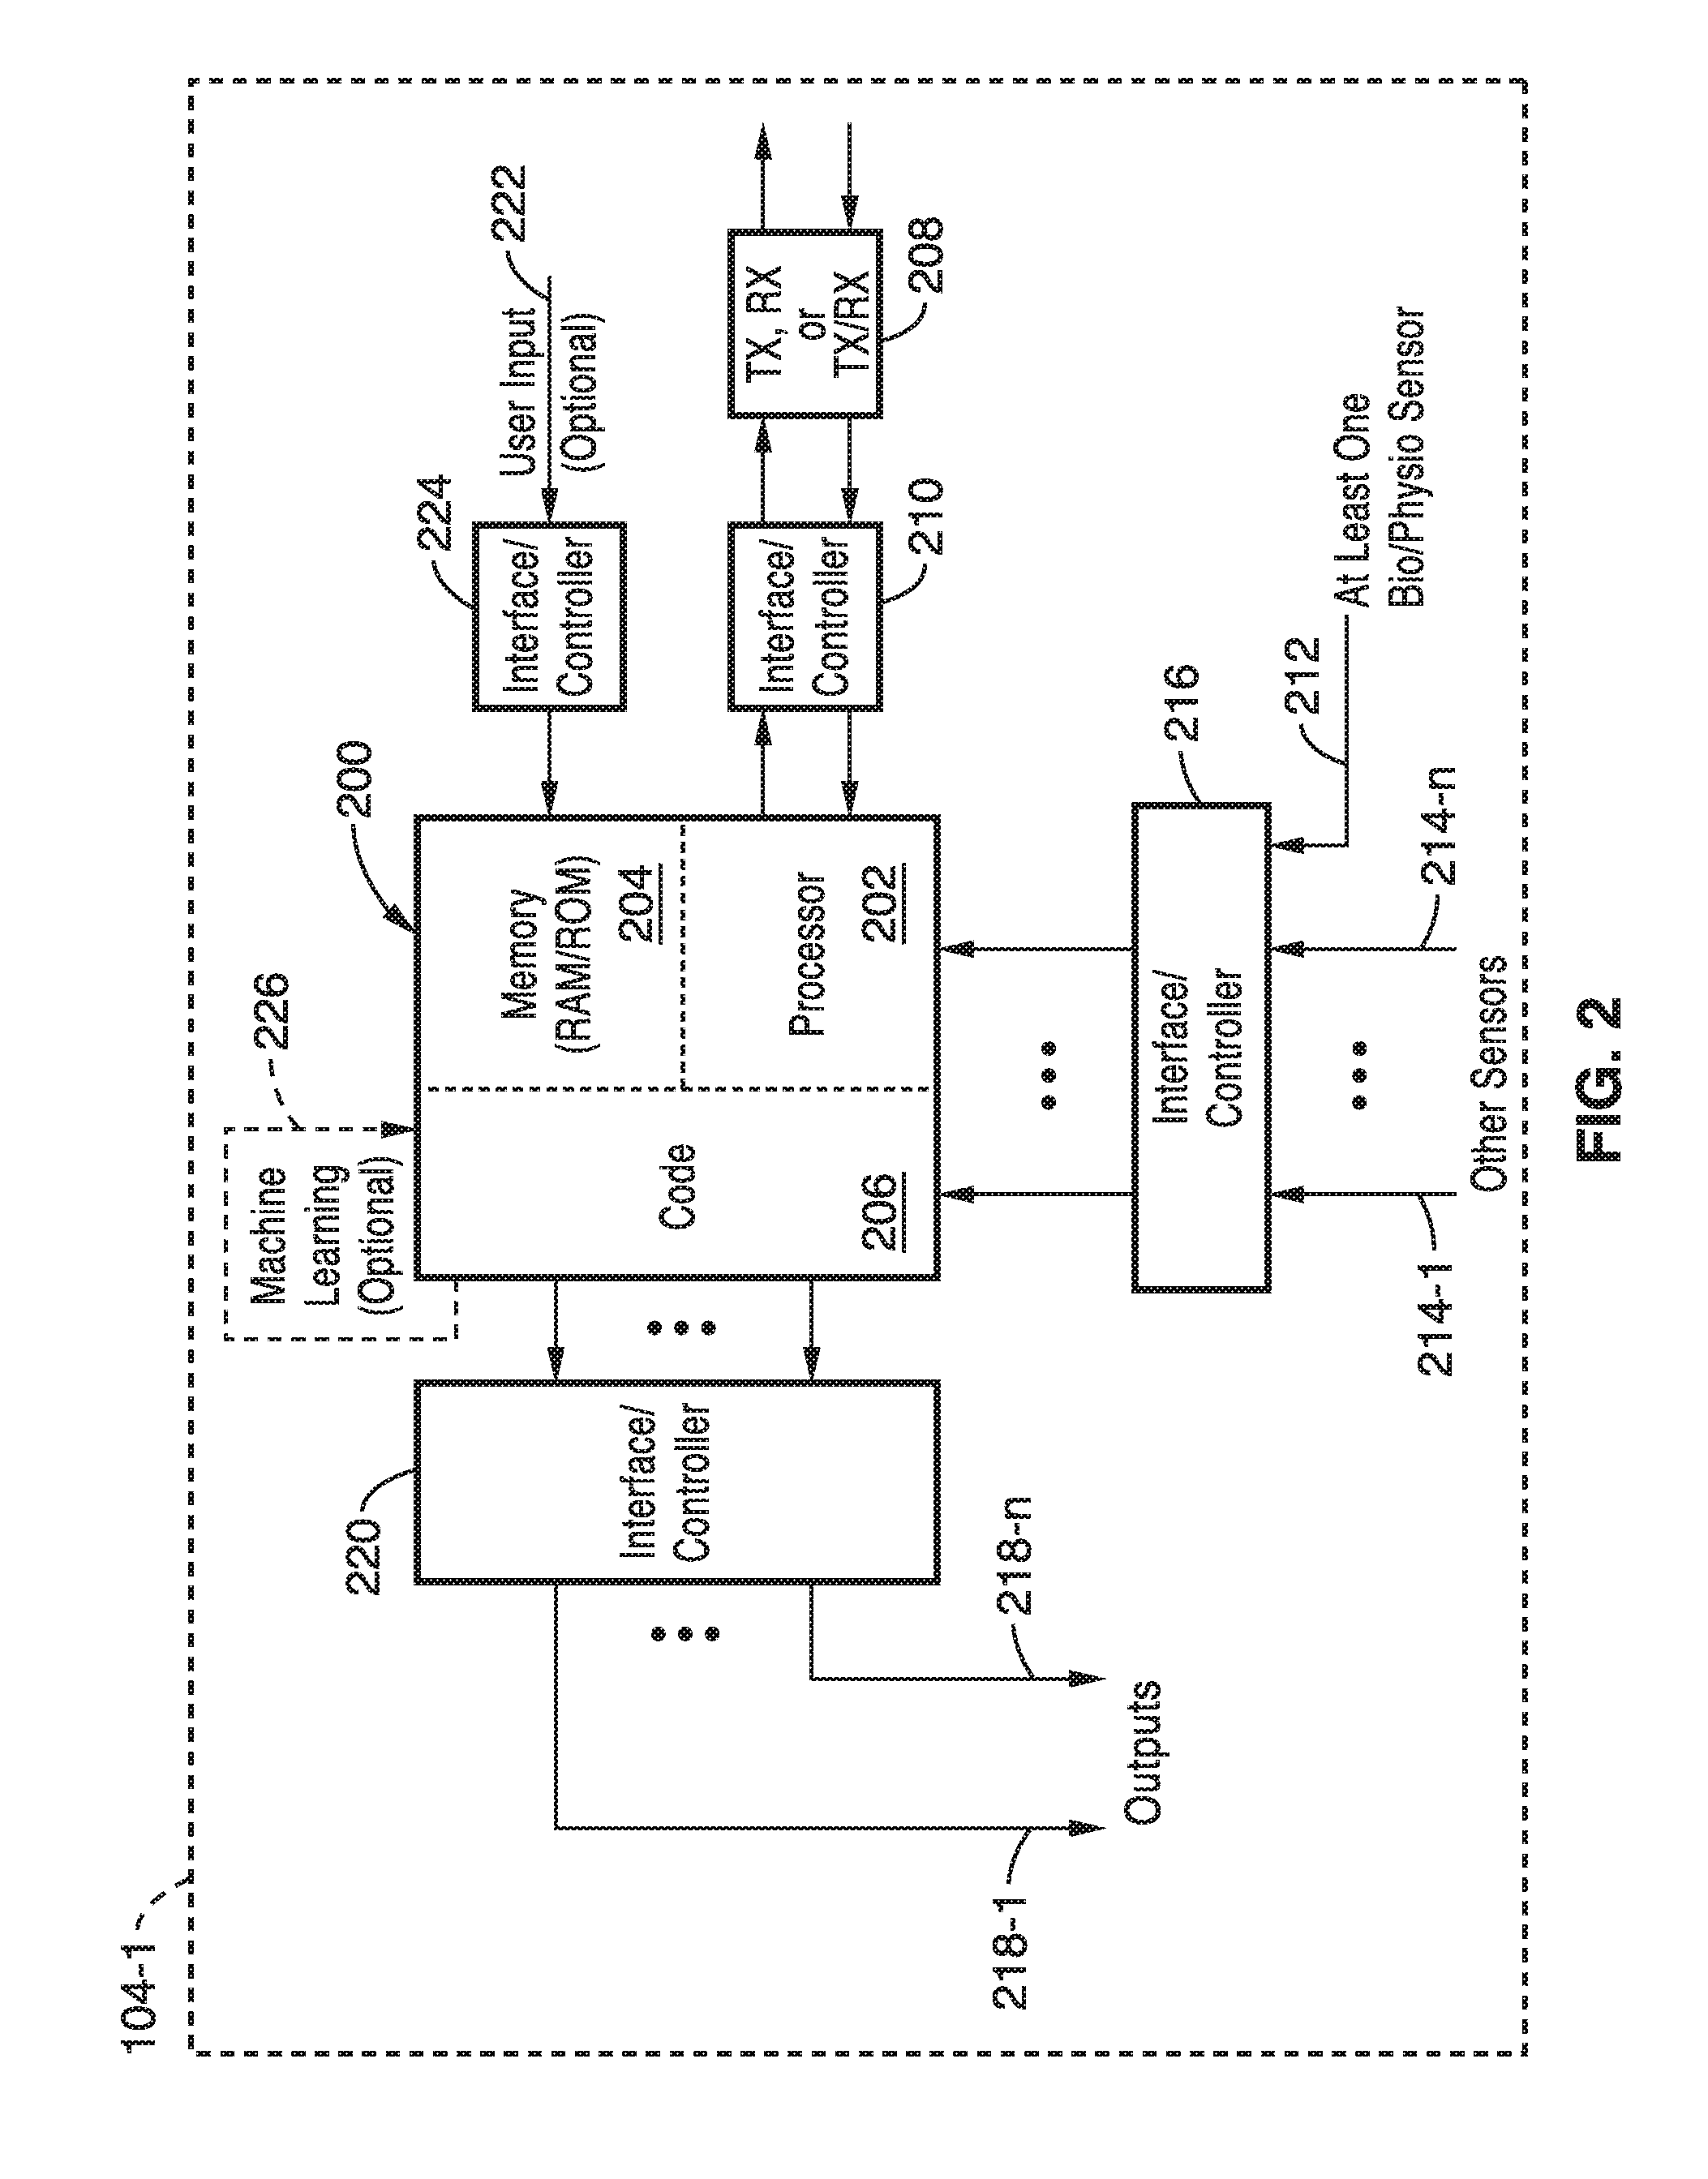 Smart wearable devices and methods for acquisition of sensorial information from wearable devices to activate functions in other devices